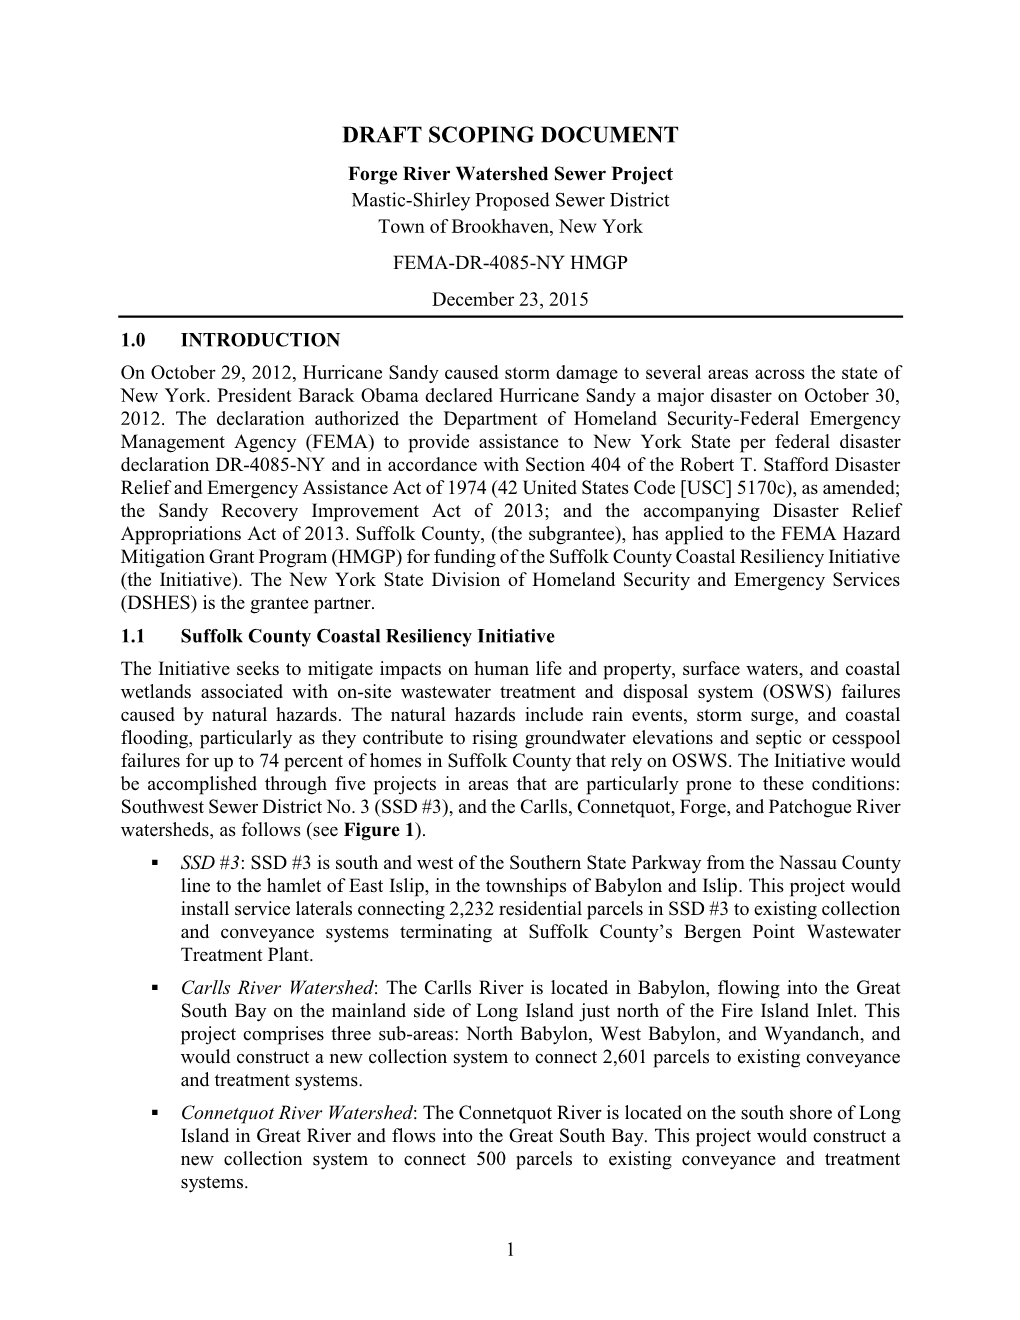 Forge River Watershed Sewer Project Draft Scoping Document